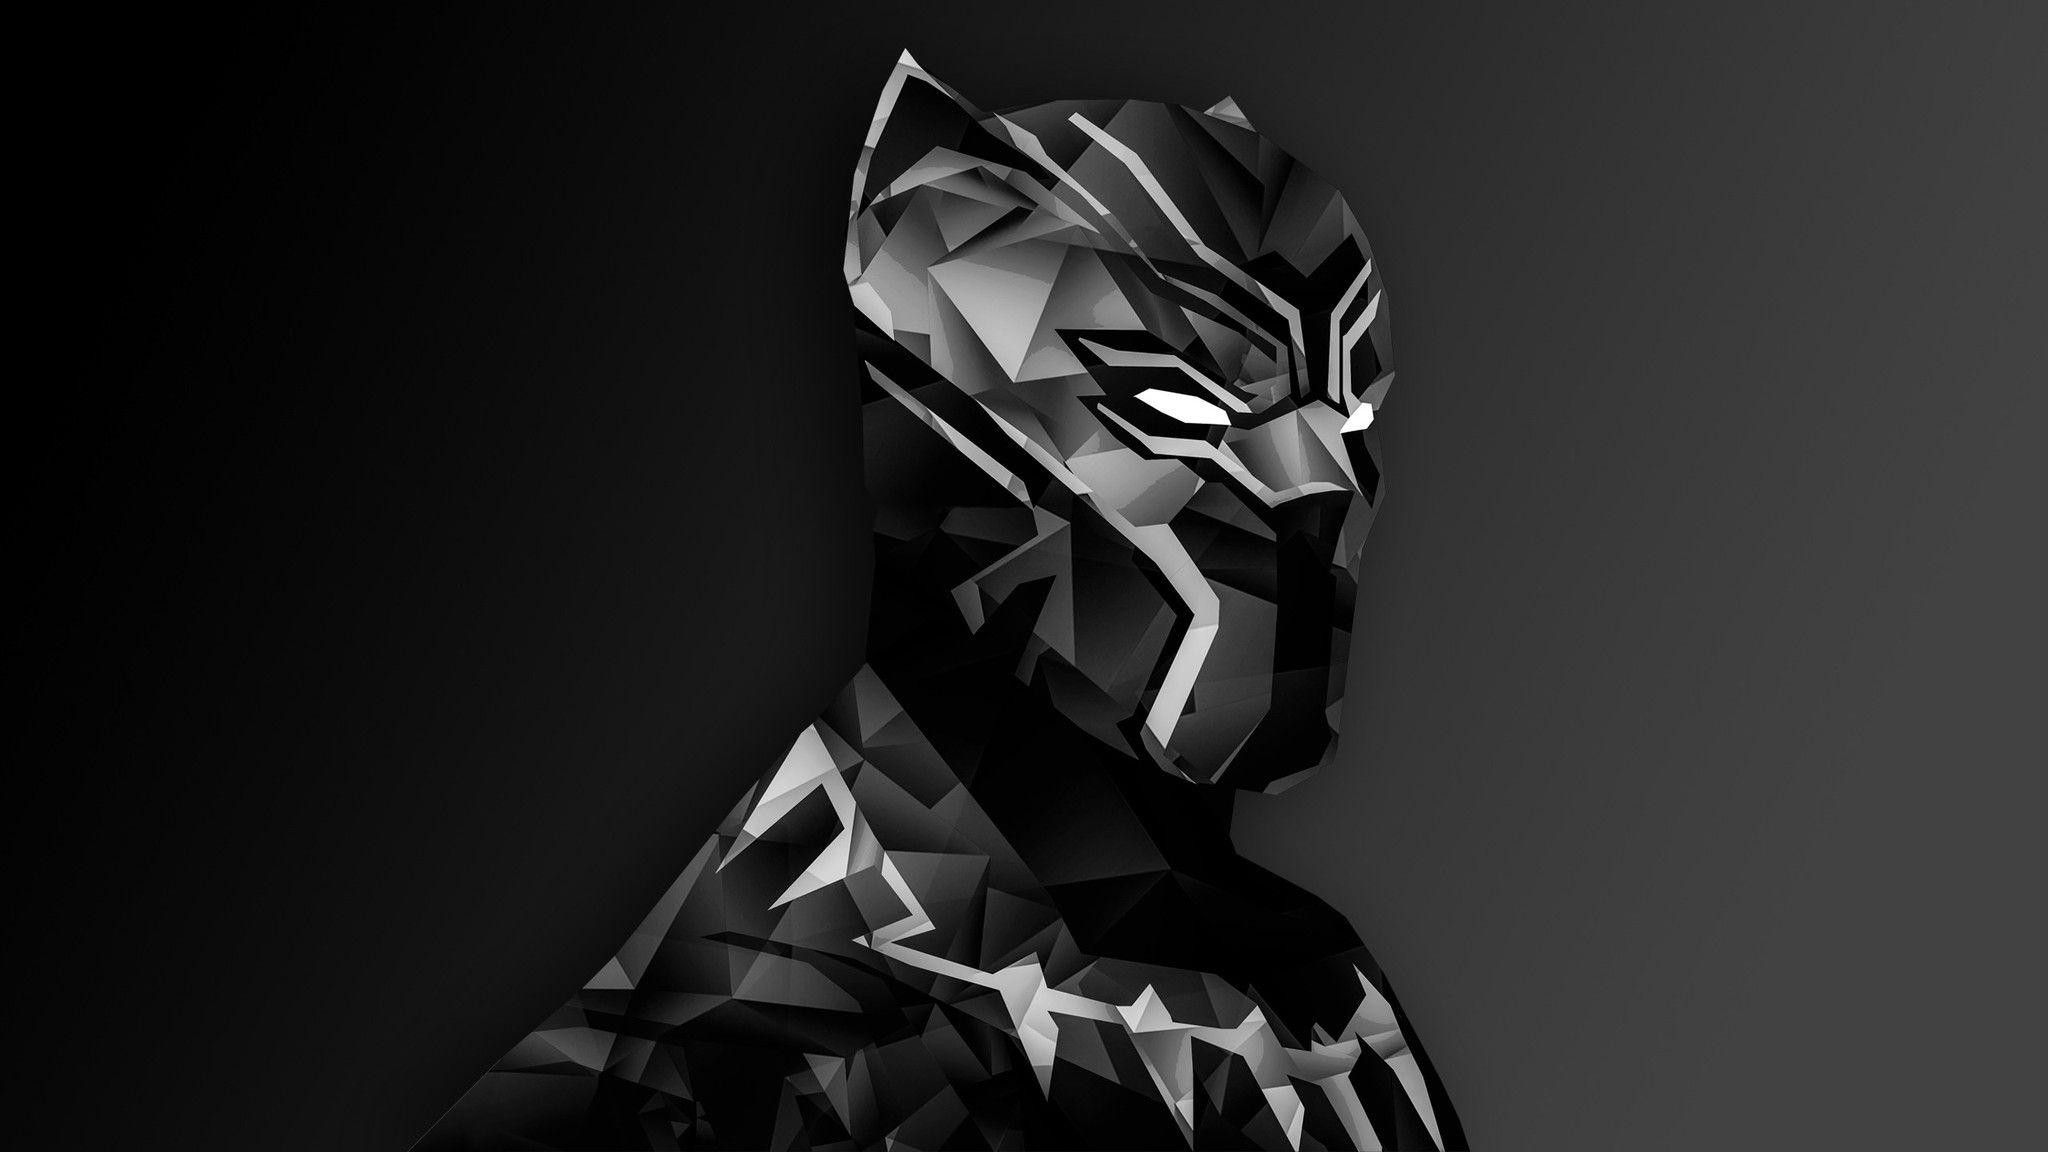 Black Panther Marvel Wallpaper background picture